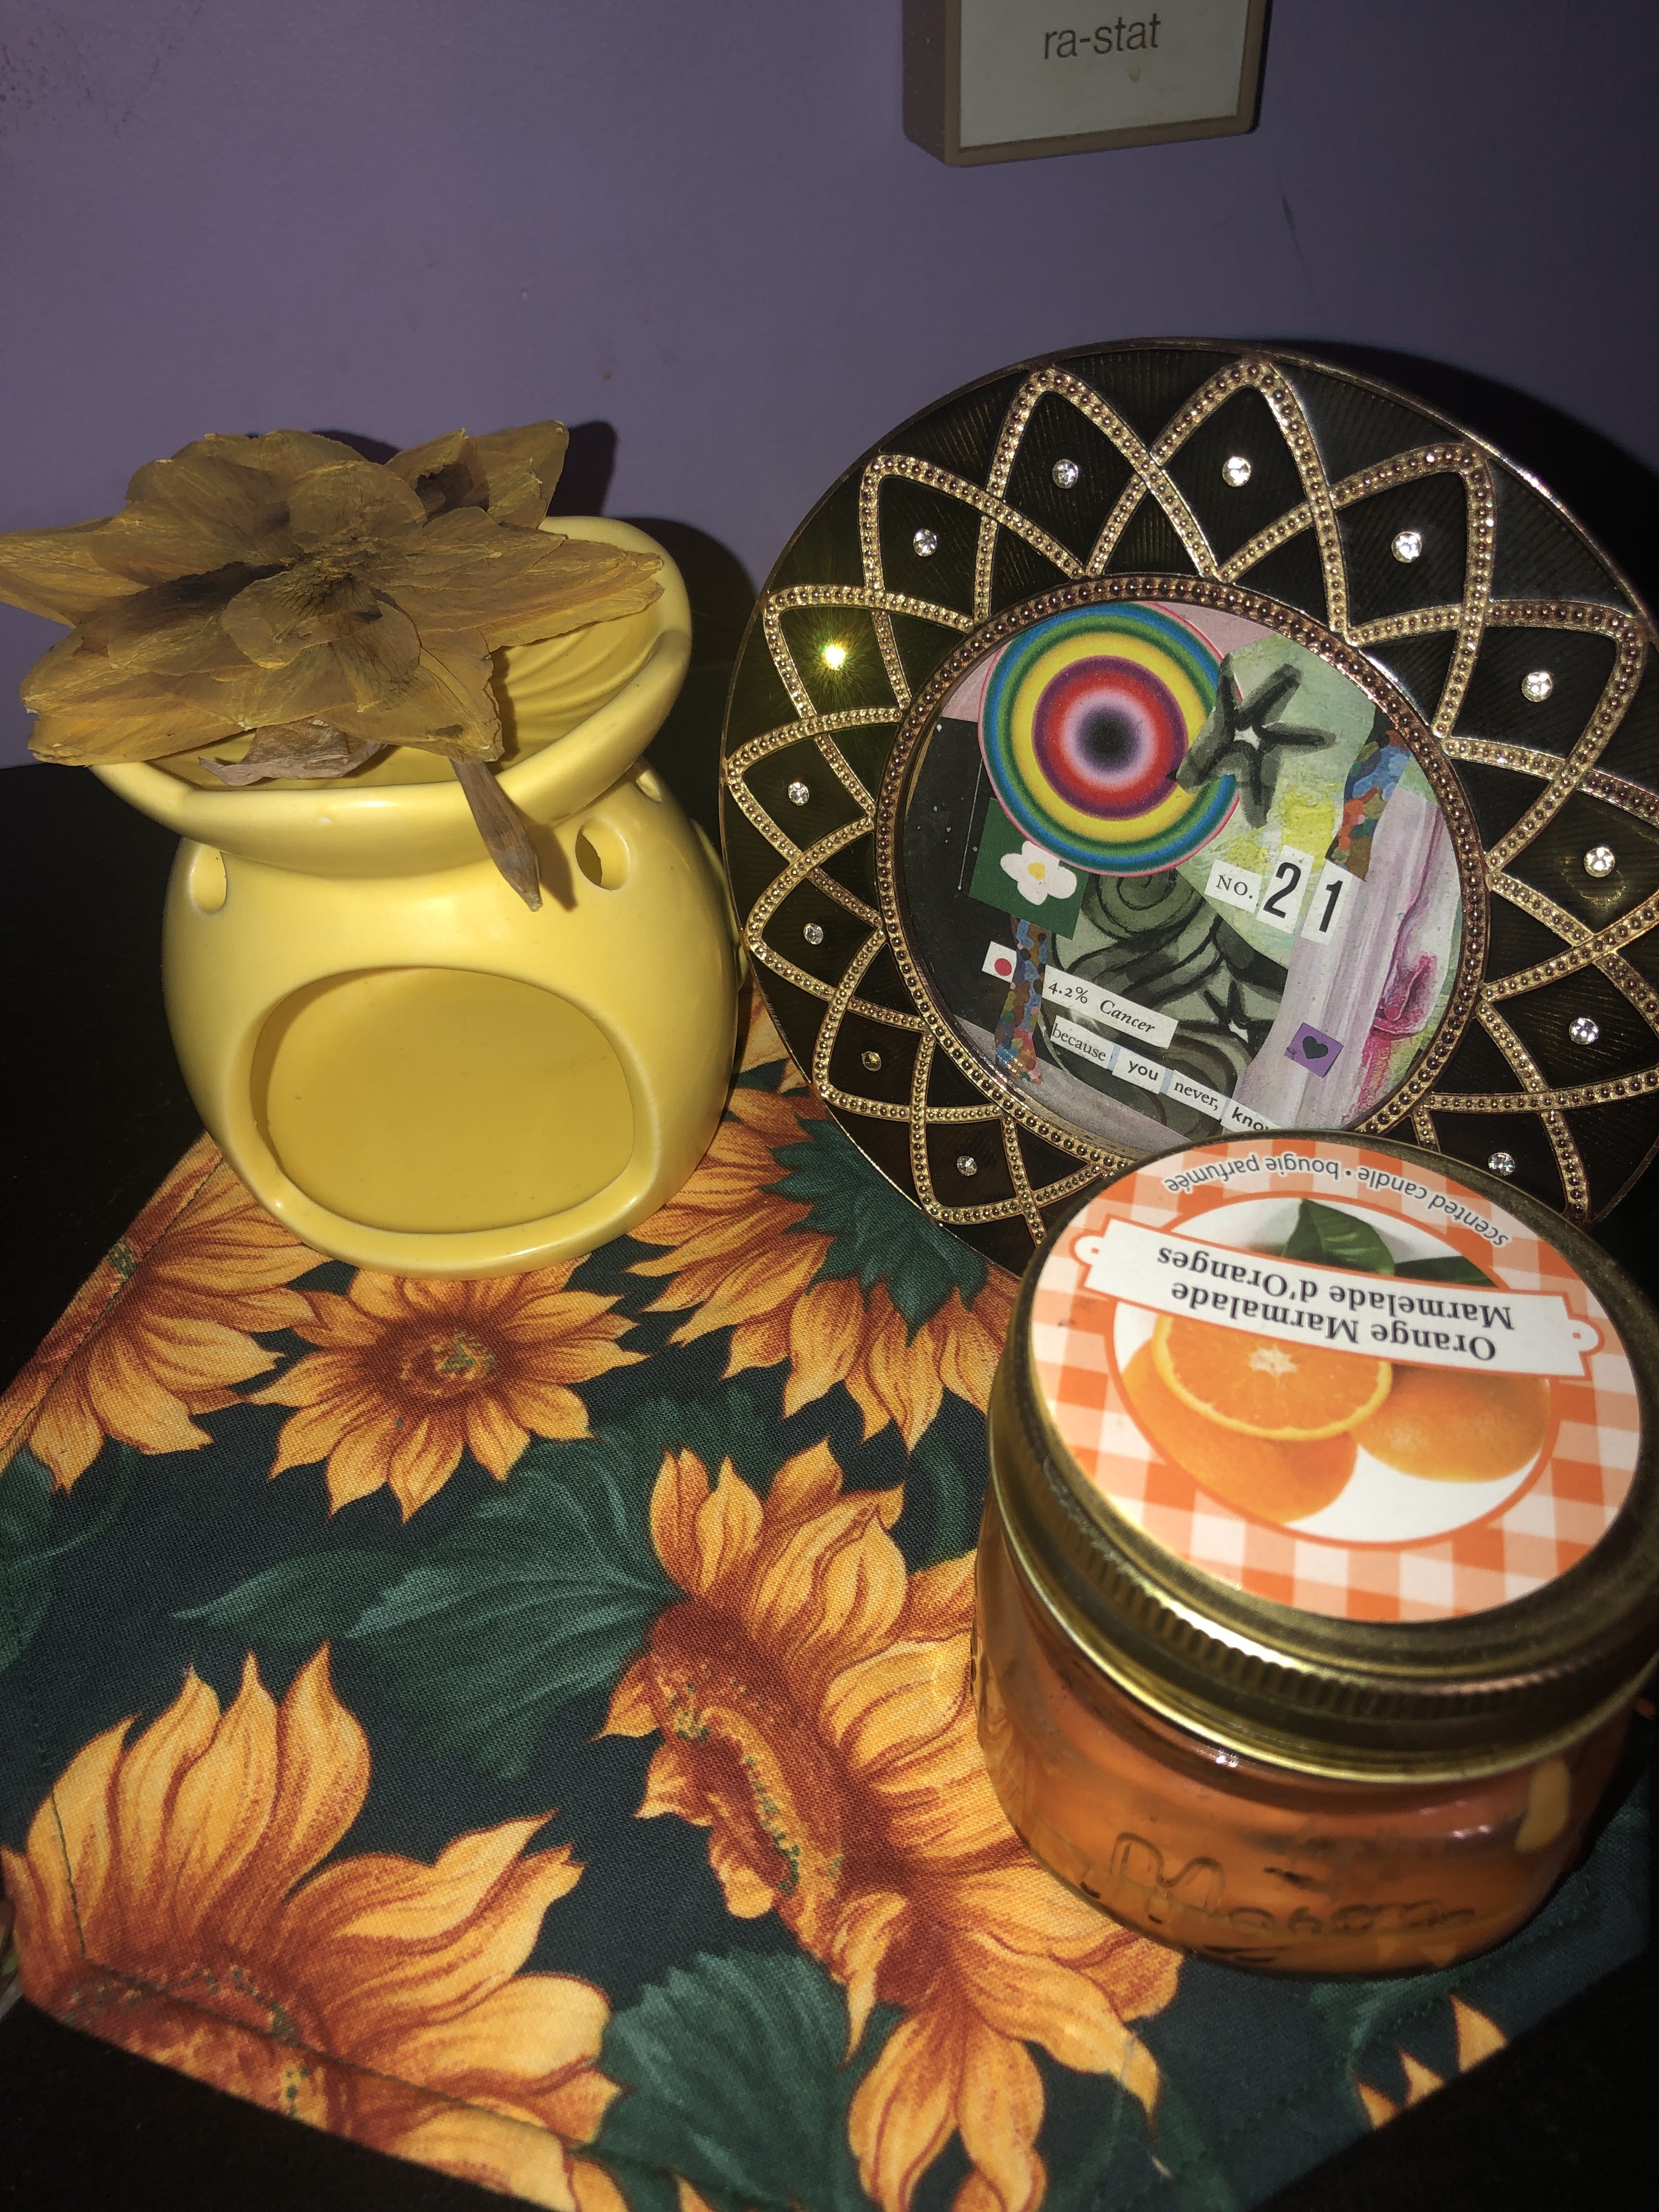 A photo of my altar for Apollo. There is a sunflower placemat. On top of it there is a yellow oil warmer with a pressed daffodil on top. Beside it is a black and gold round picture frame holding a personal collage I've made. In front of the frame is an orange candle in a jar.